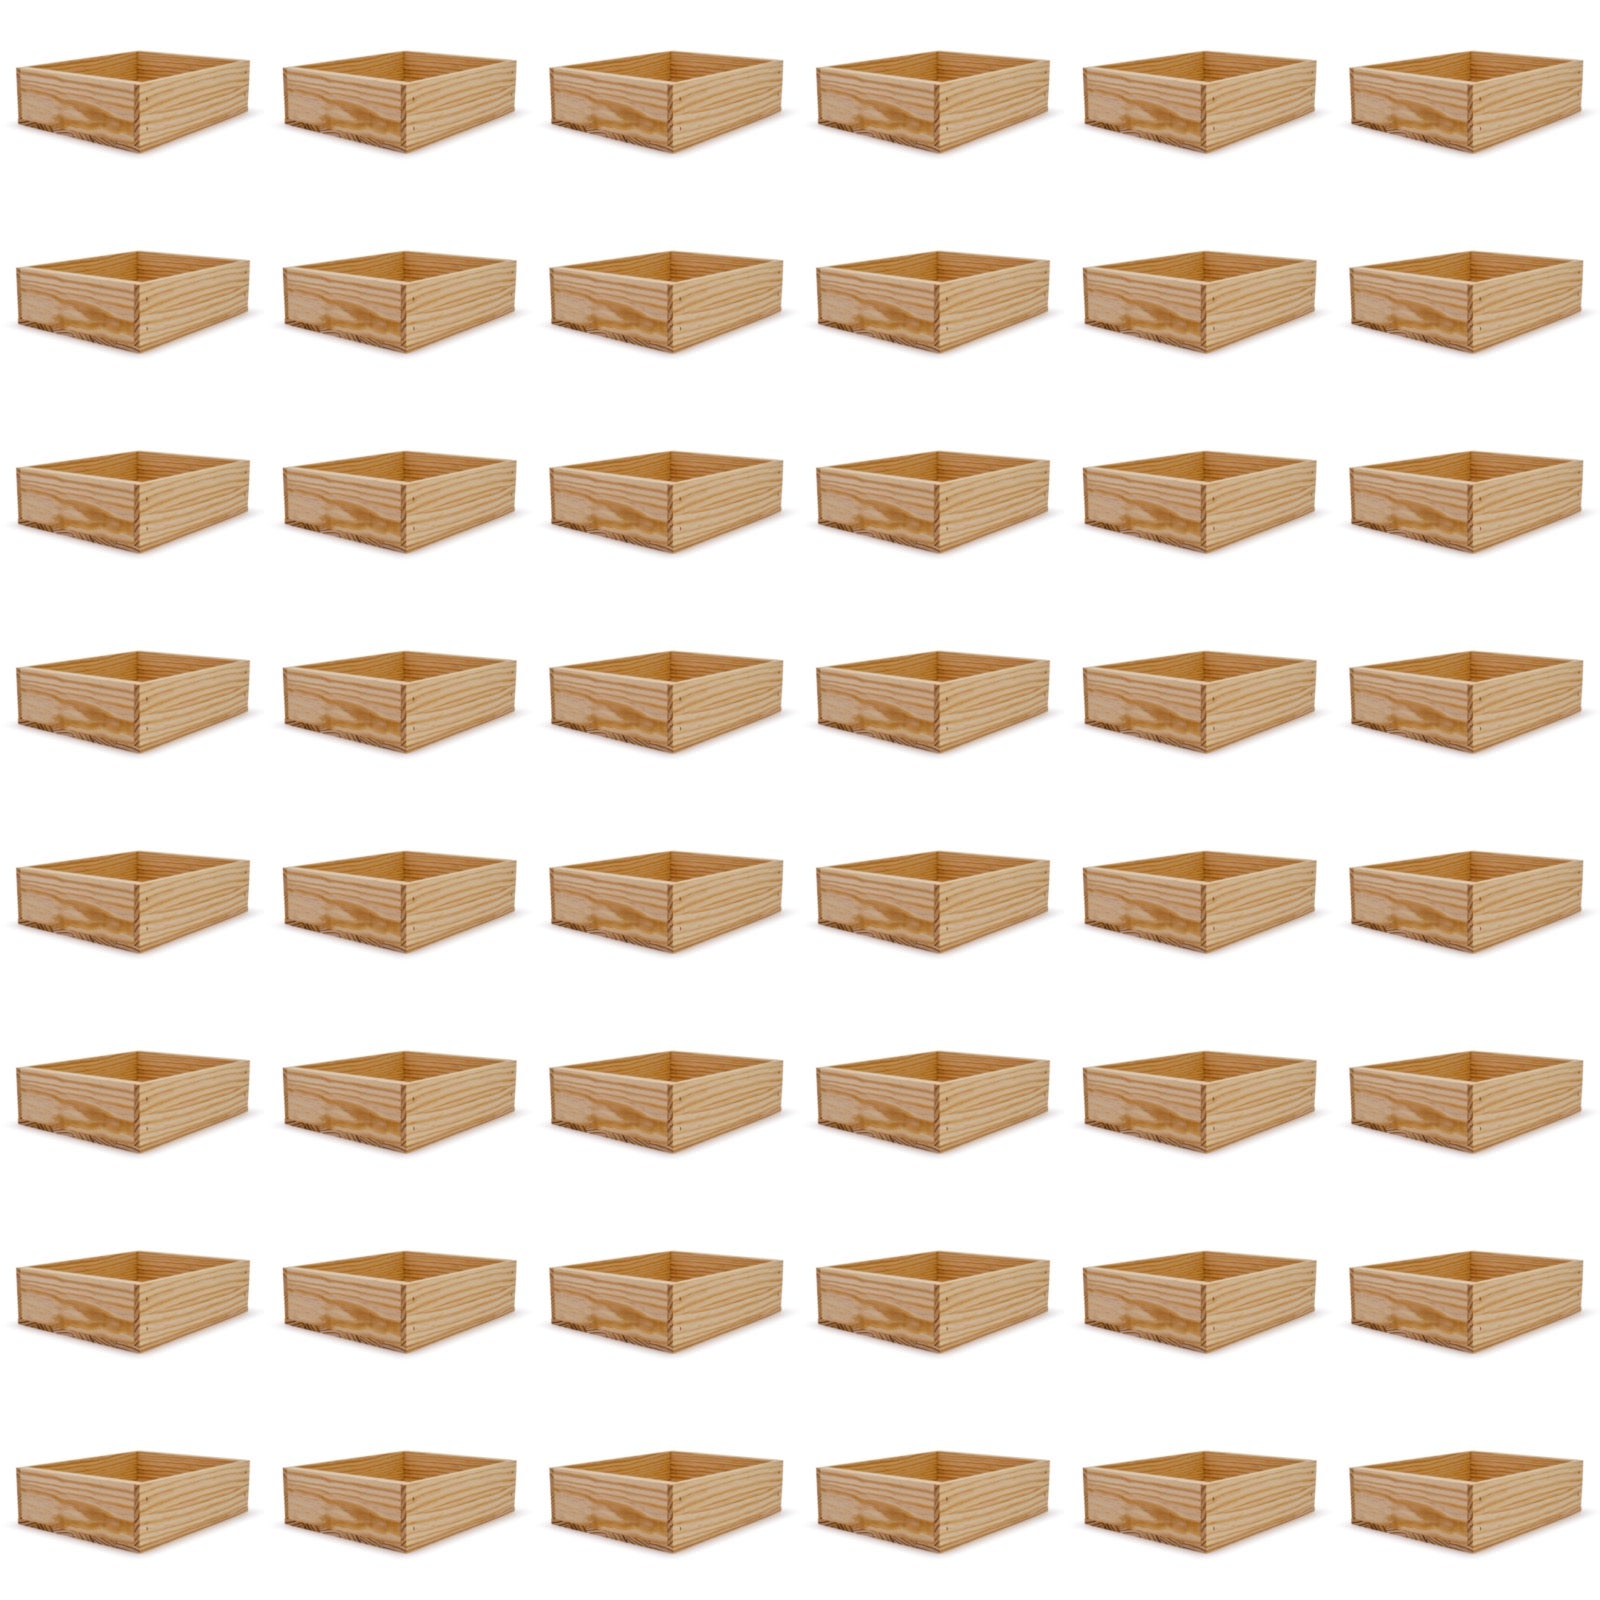 48 Small wooden crates 12x9.75x3.5